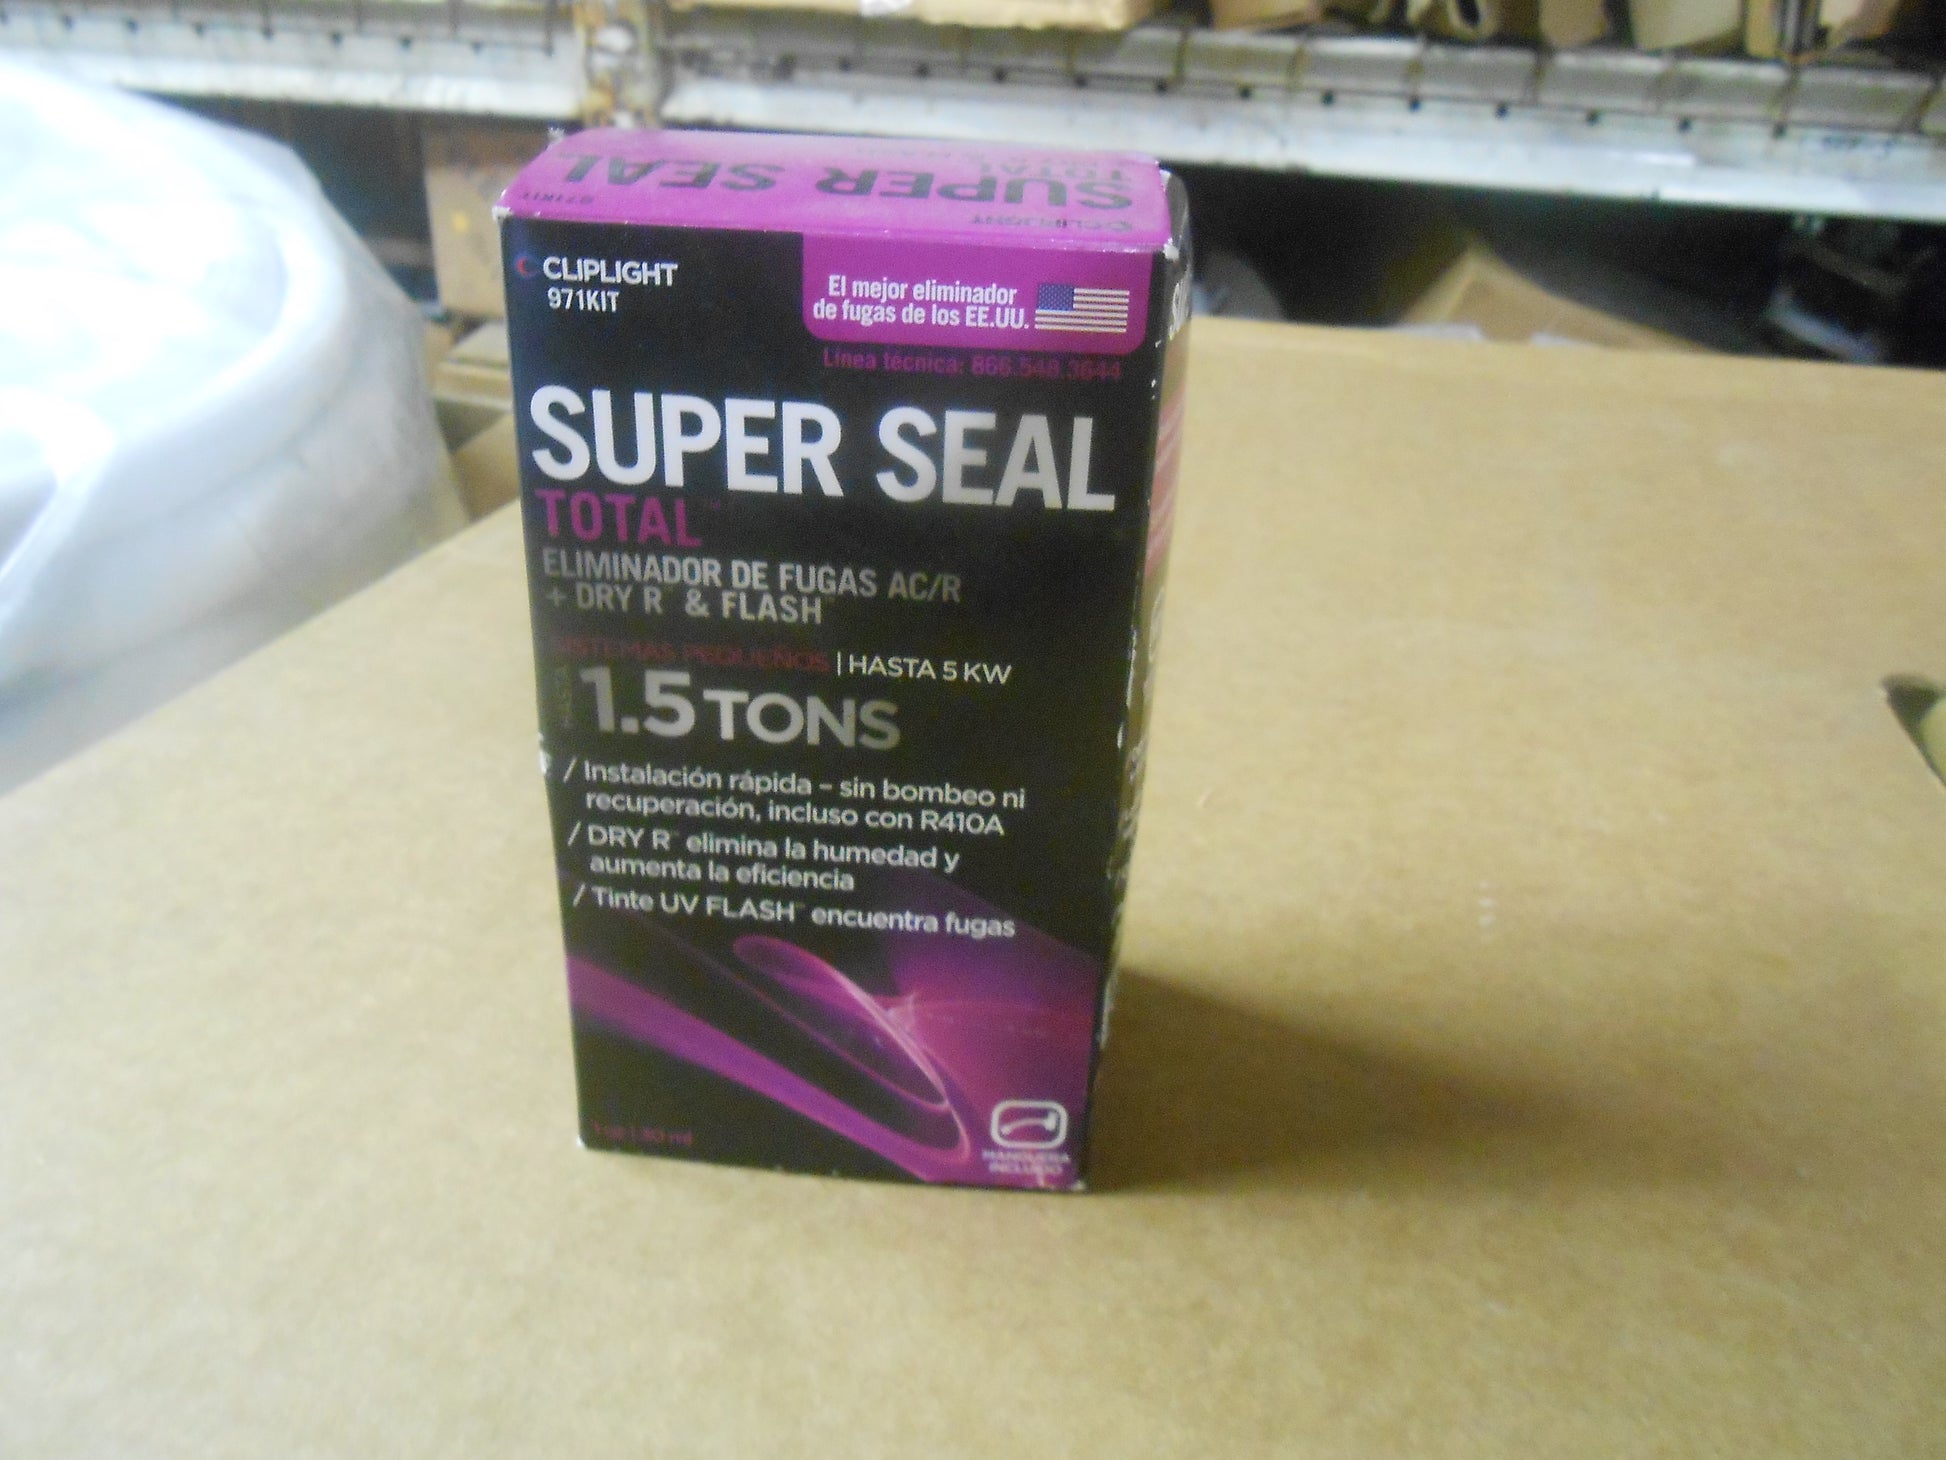 SUPER SEAL TOTAL AC/R STOP LEAK + DRY R AND FLASH, FOR SMALLSYSTEMS